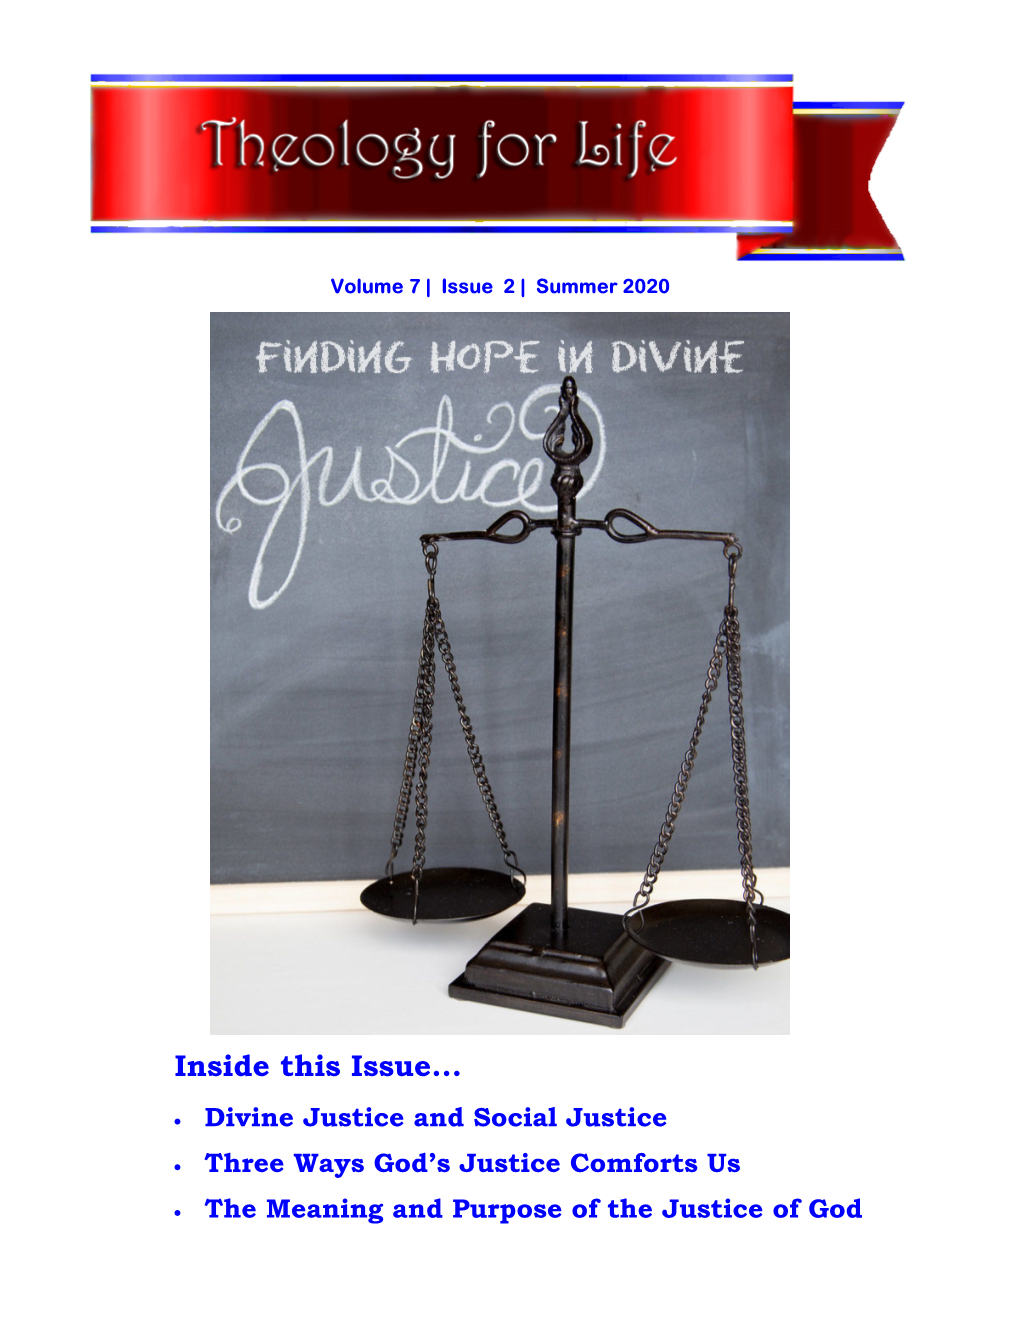 Finding Hope in Divine Justice Page 3